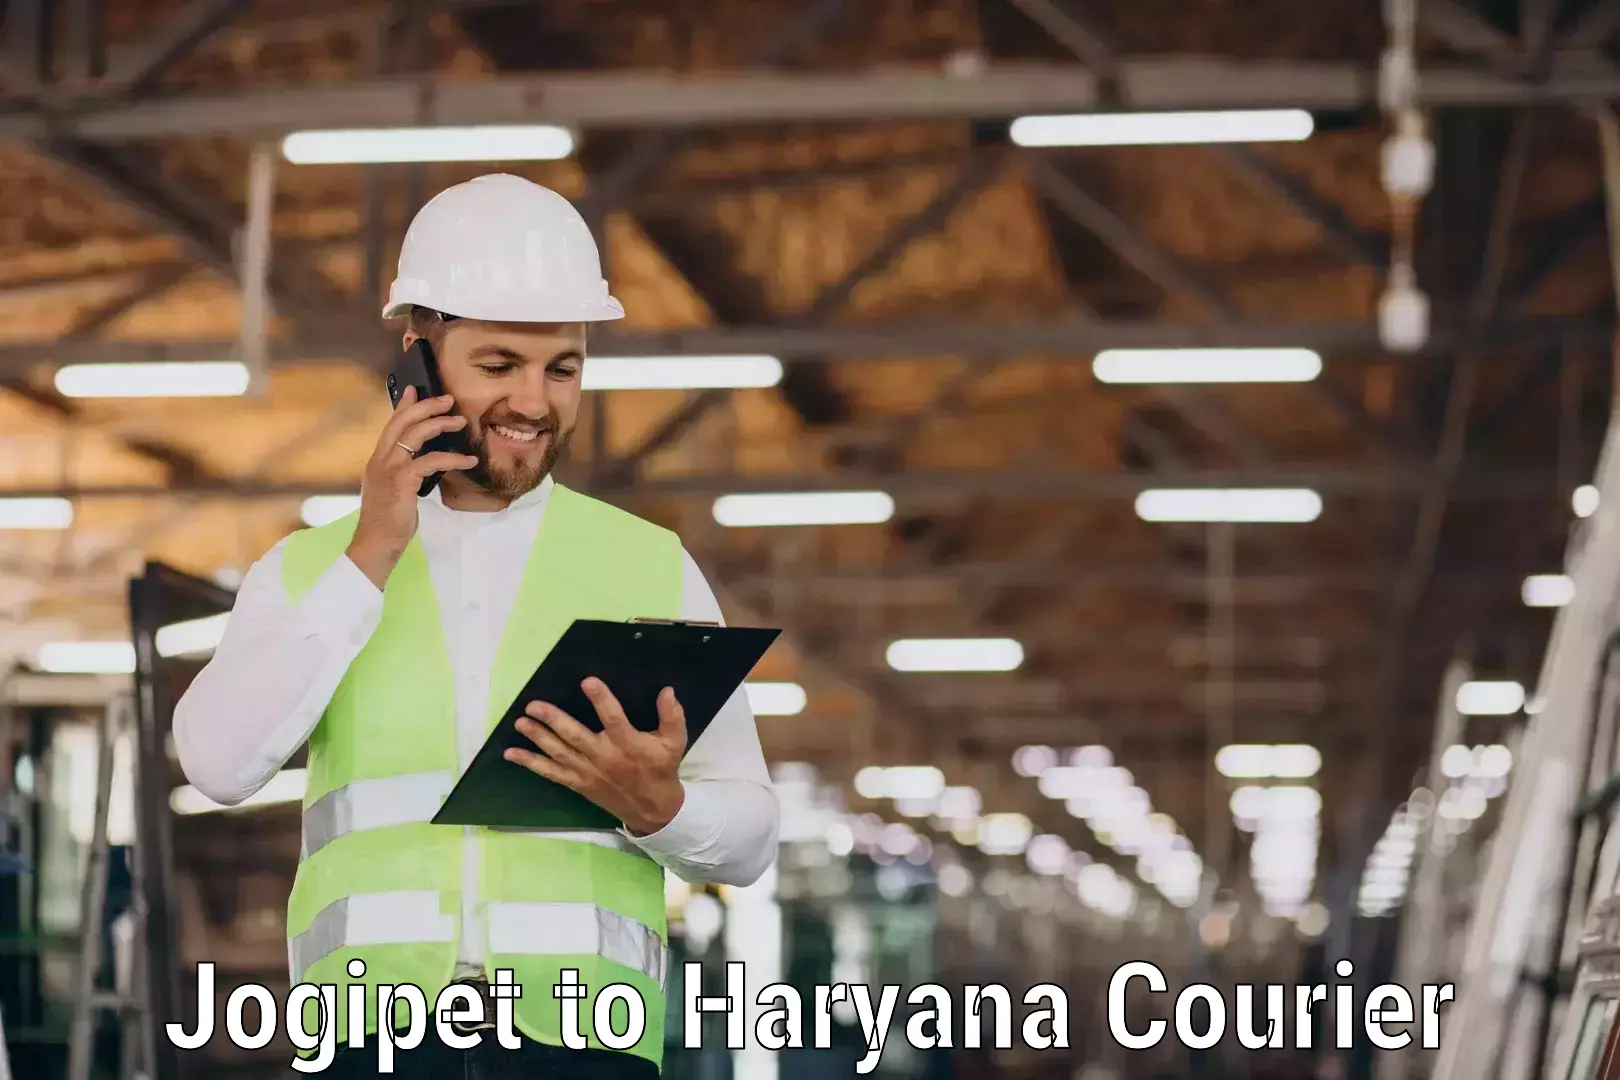 Courier tracking online Jogipet to Chaudhary Charan Singh Haryana Agricultural University Hisar